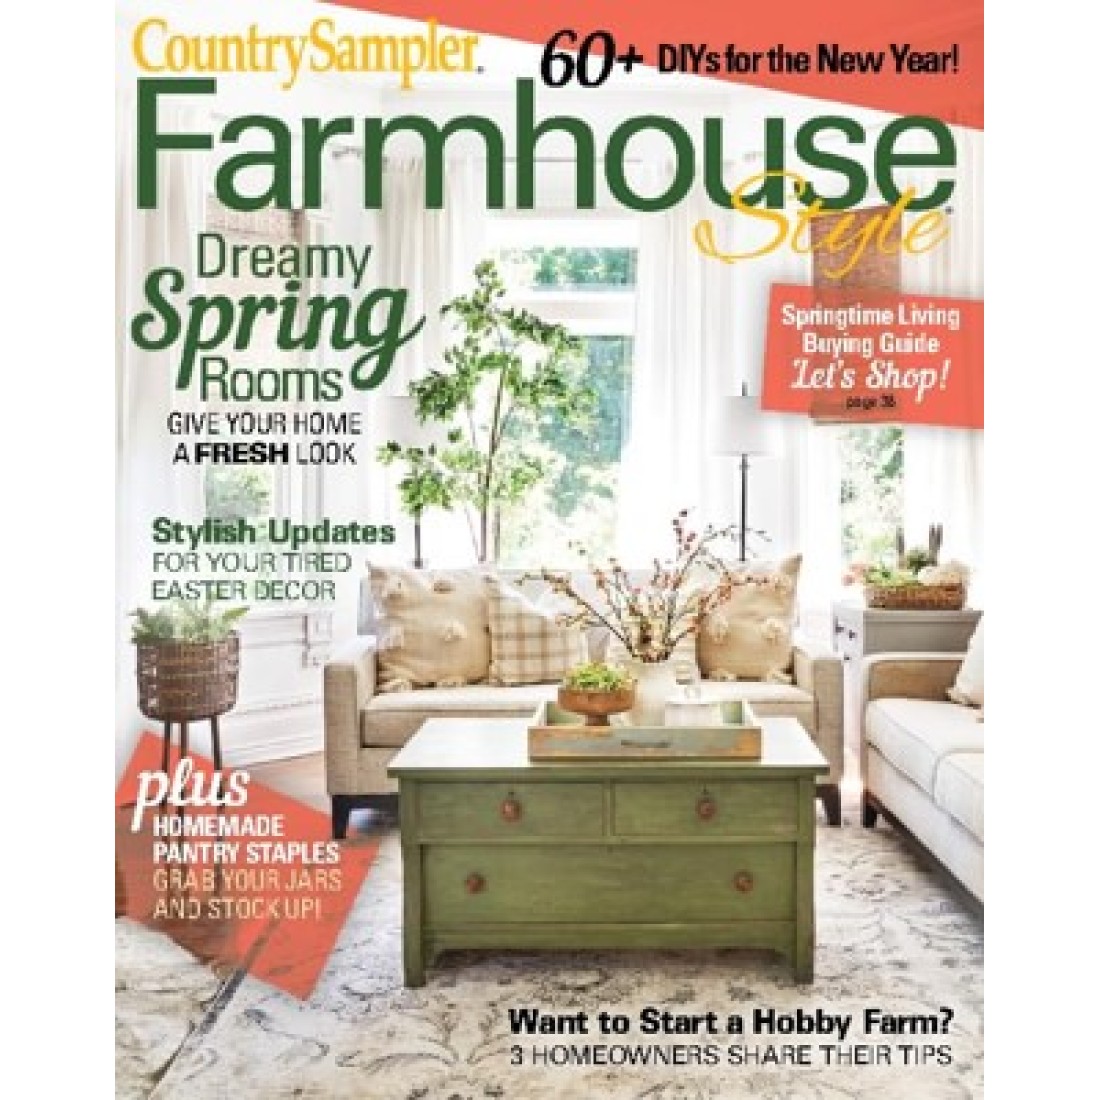 Subscribe or Renew Farmhouse Style Magazine Subscription. Save 37%